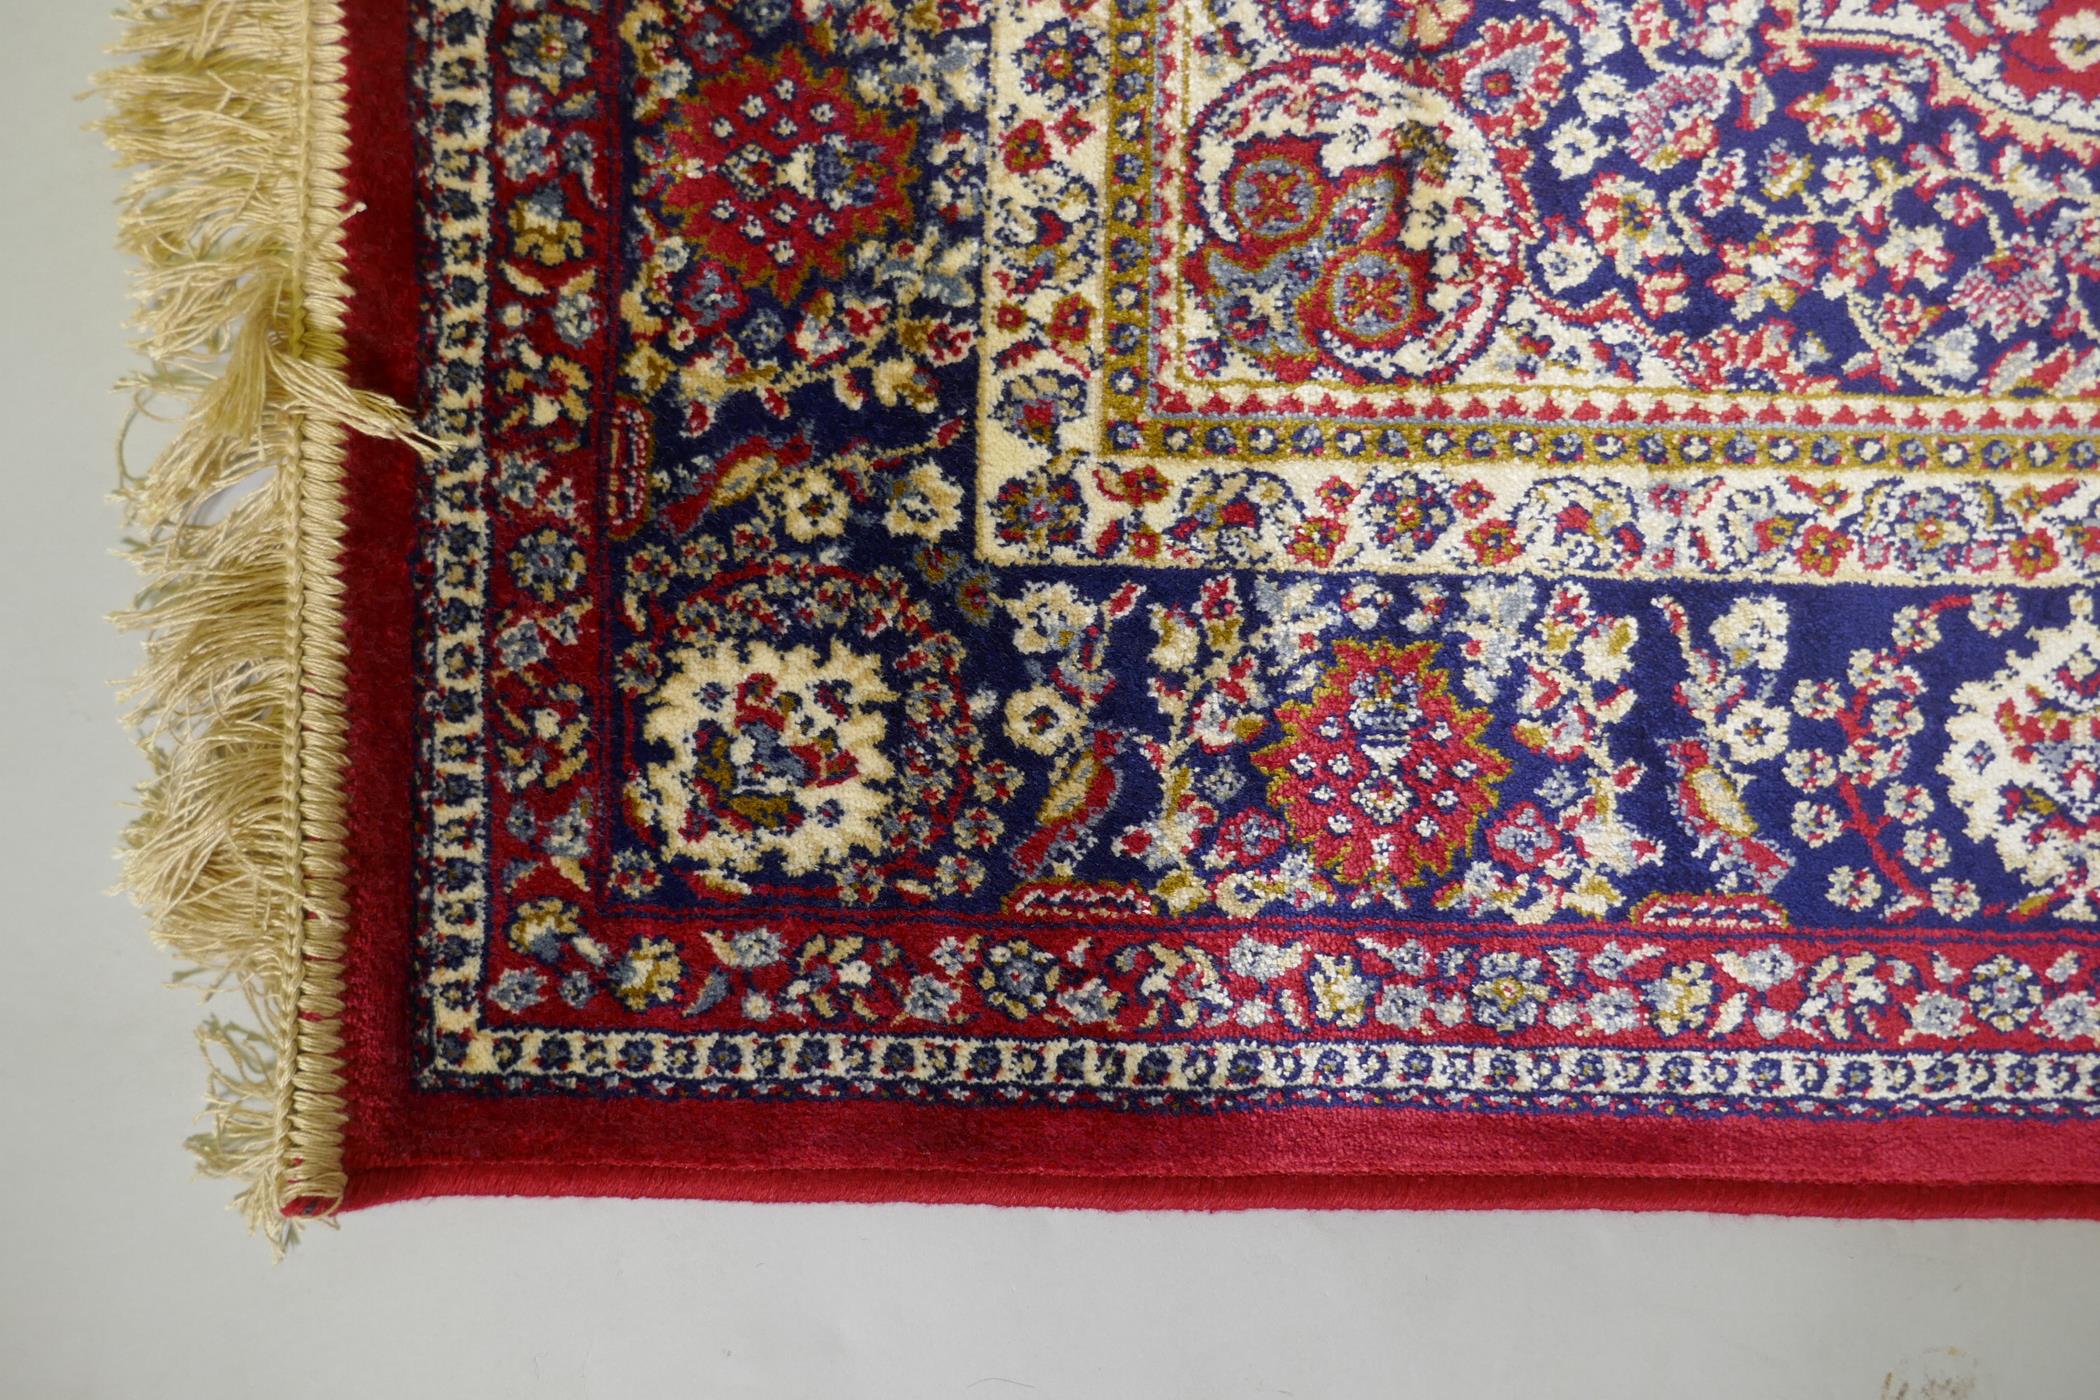 A red ground Kashmir rug with traditional floral medallion design and blue borders, 170 x 120cm - Image 4 of 5